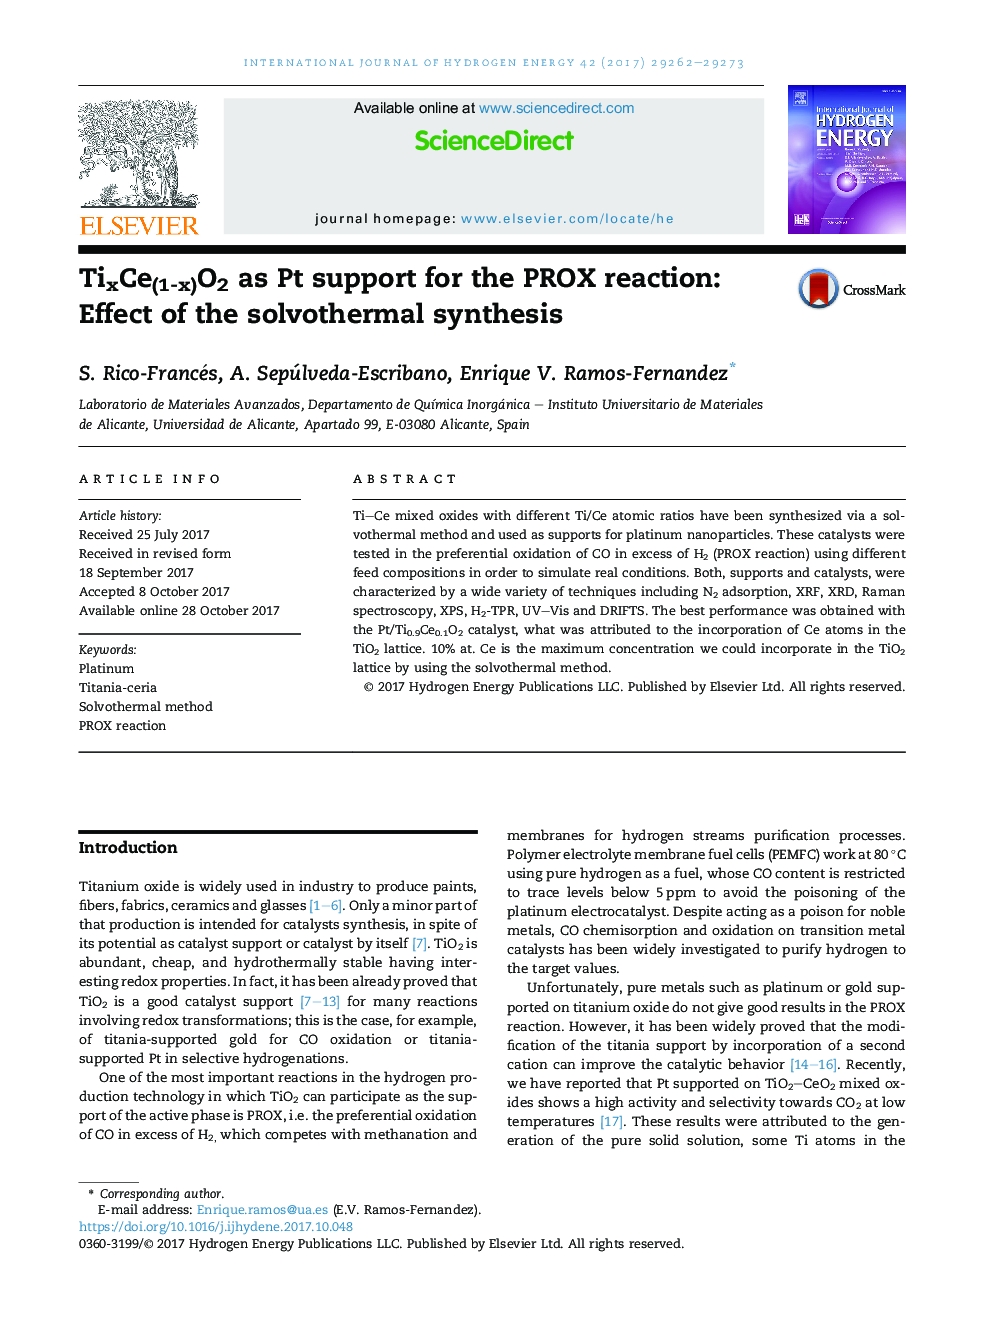 TixCe(1-x)O2 as Pt support for the PROX reaction: Effect of the solvothermal synthesis